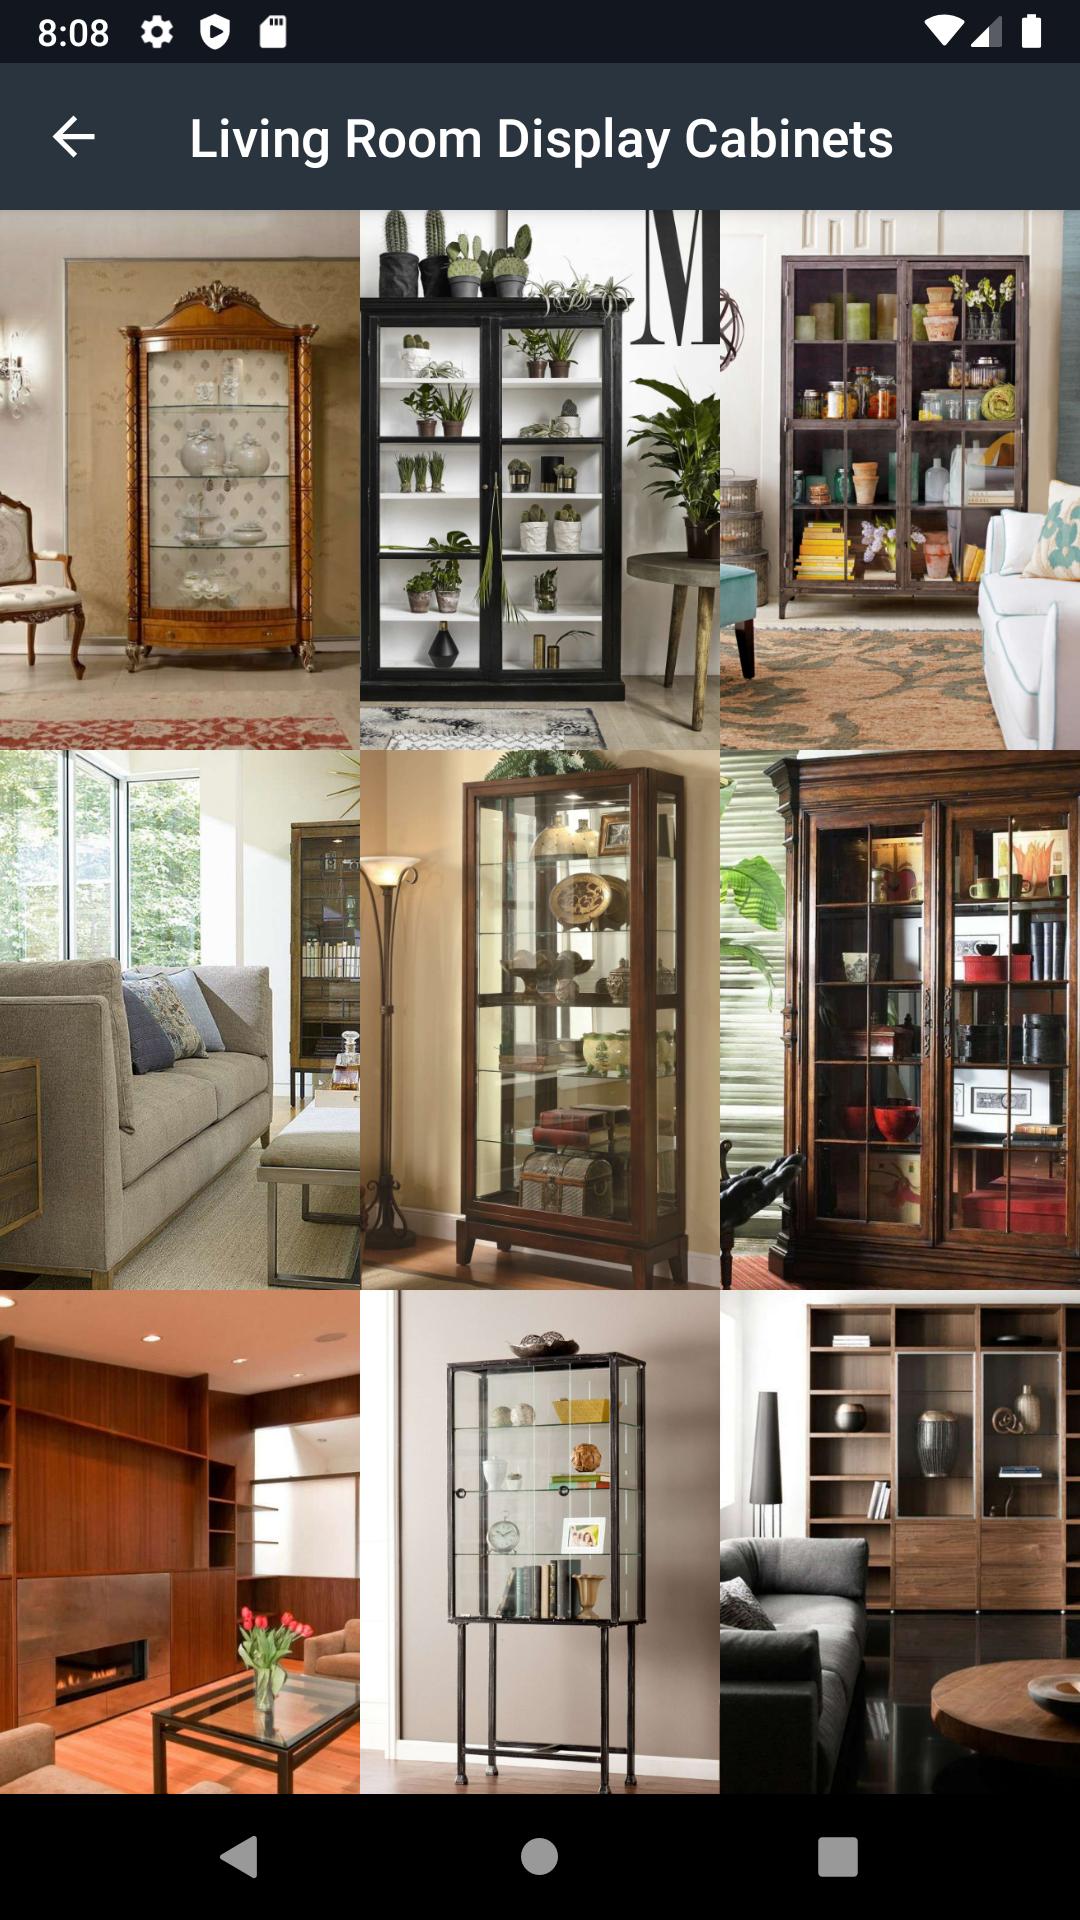 Living Room Display Cabinets For Android APK Download